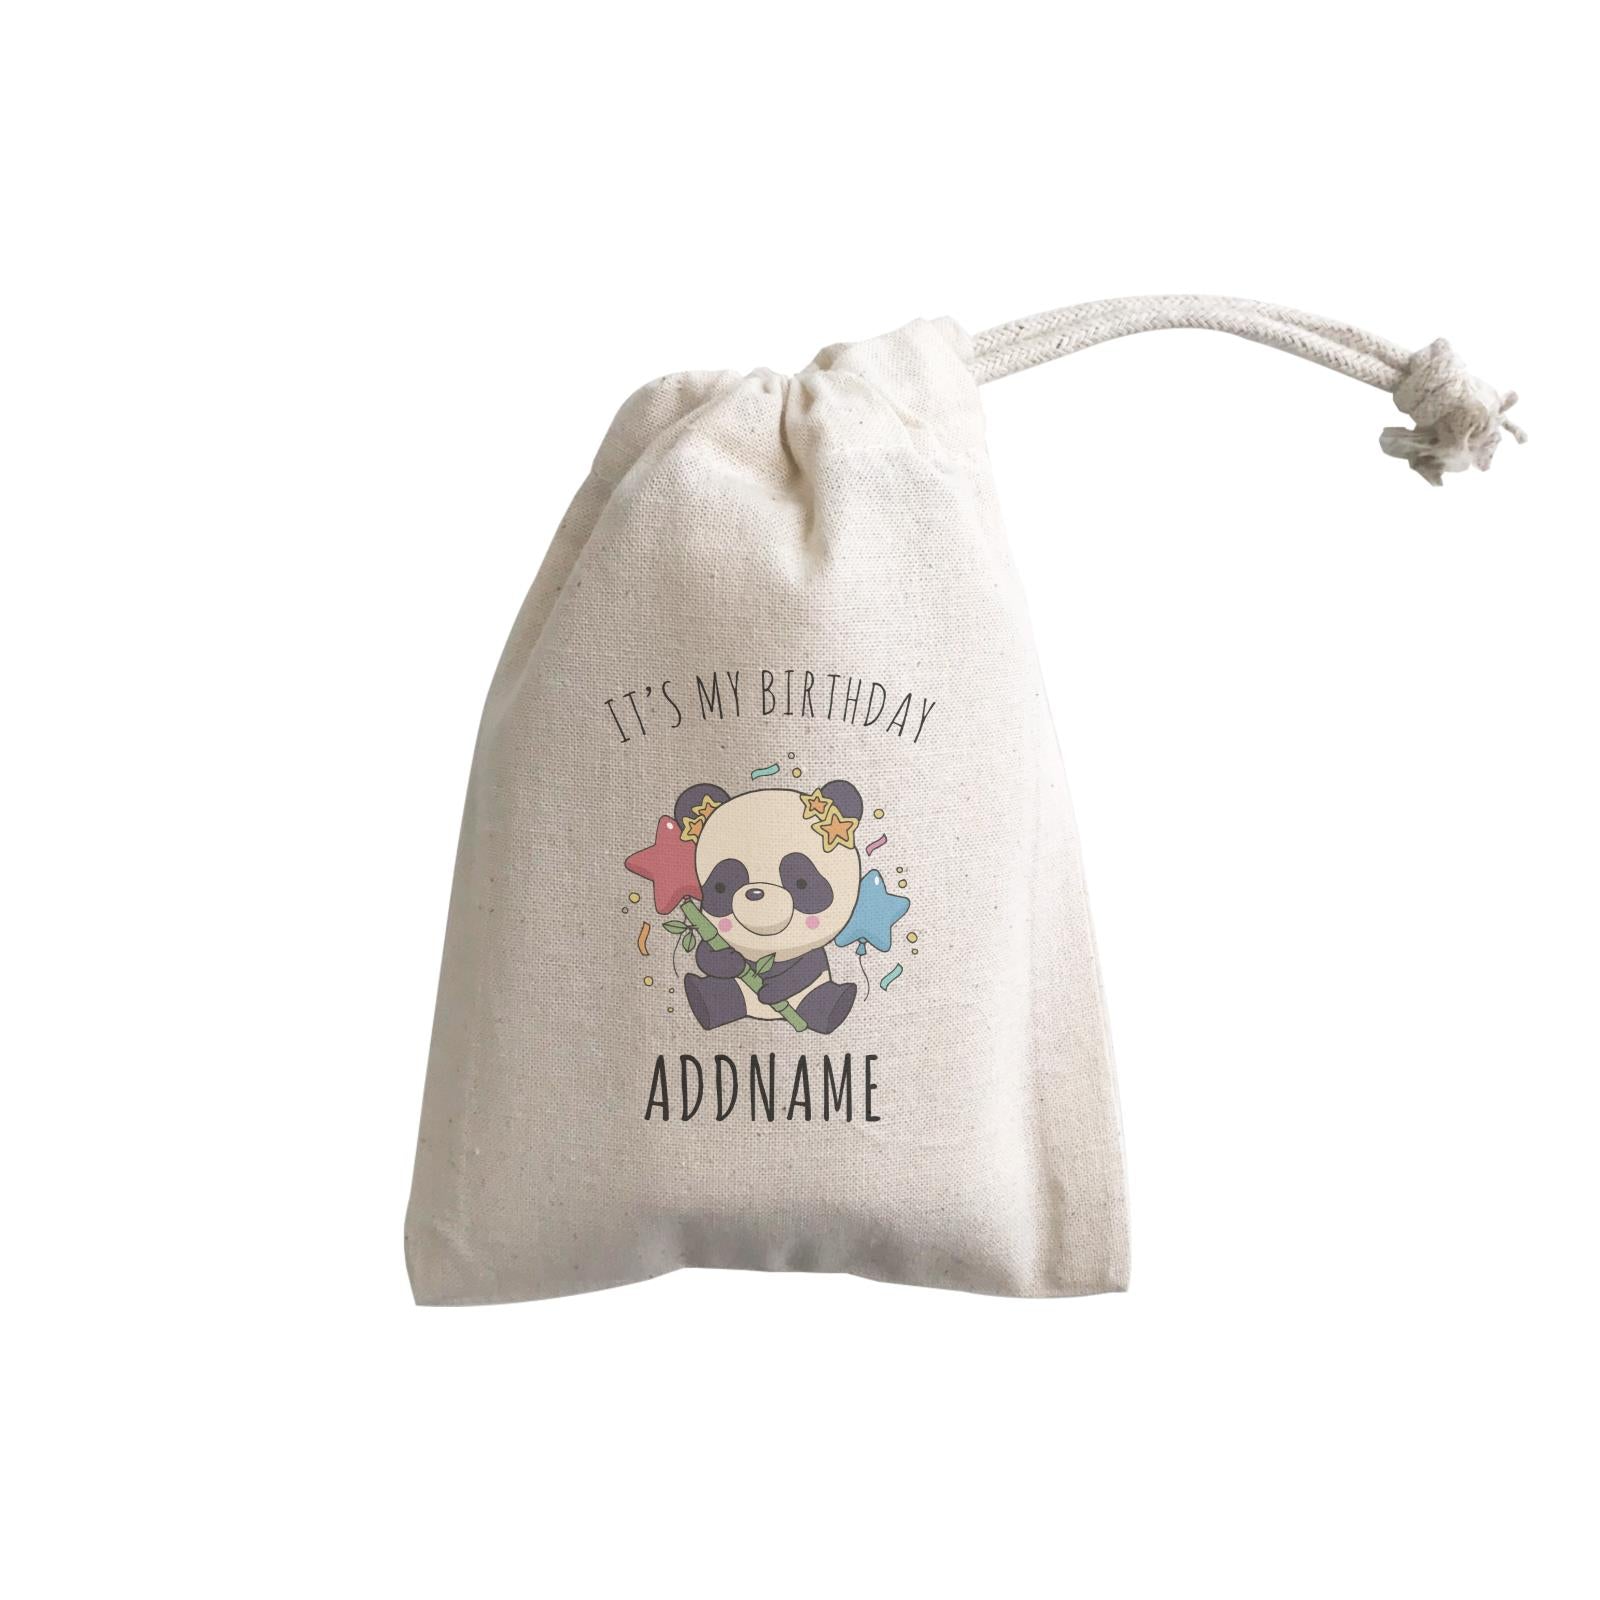 Birthday Sketch Animals Panda with Party Hat Holding Bamboo It's My Birthday Addname GP Gift Pouch